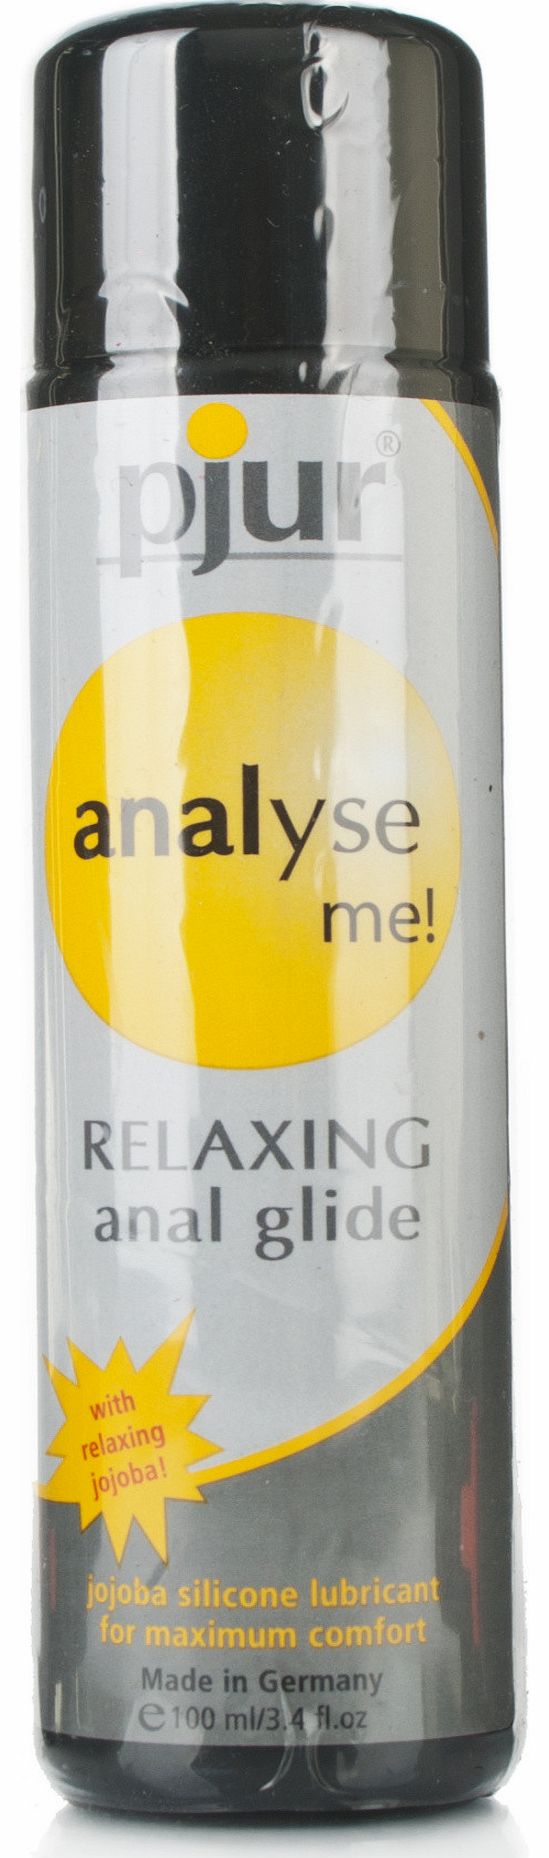 Analyse me! Relaxing Anal Glide